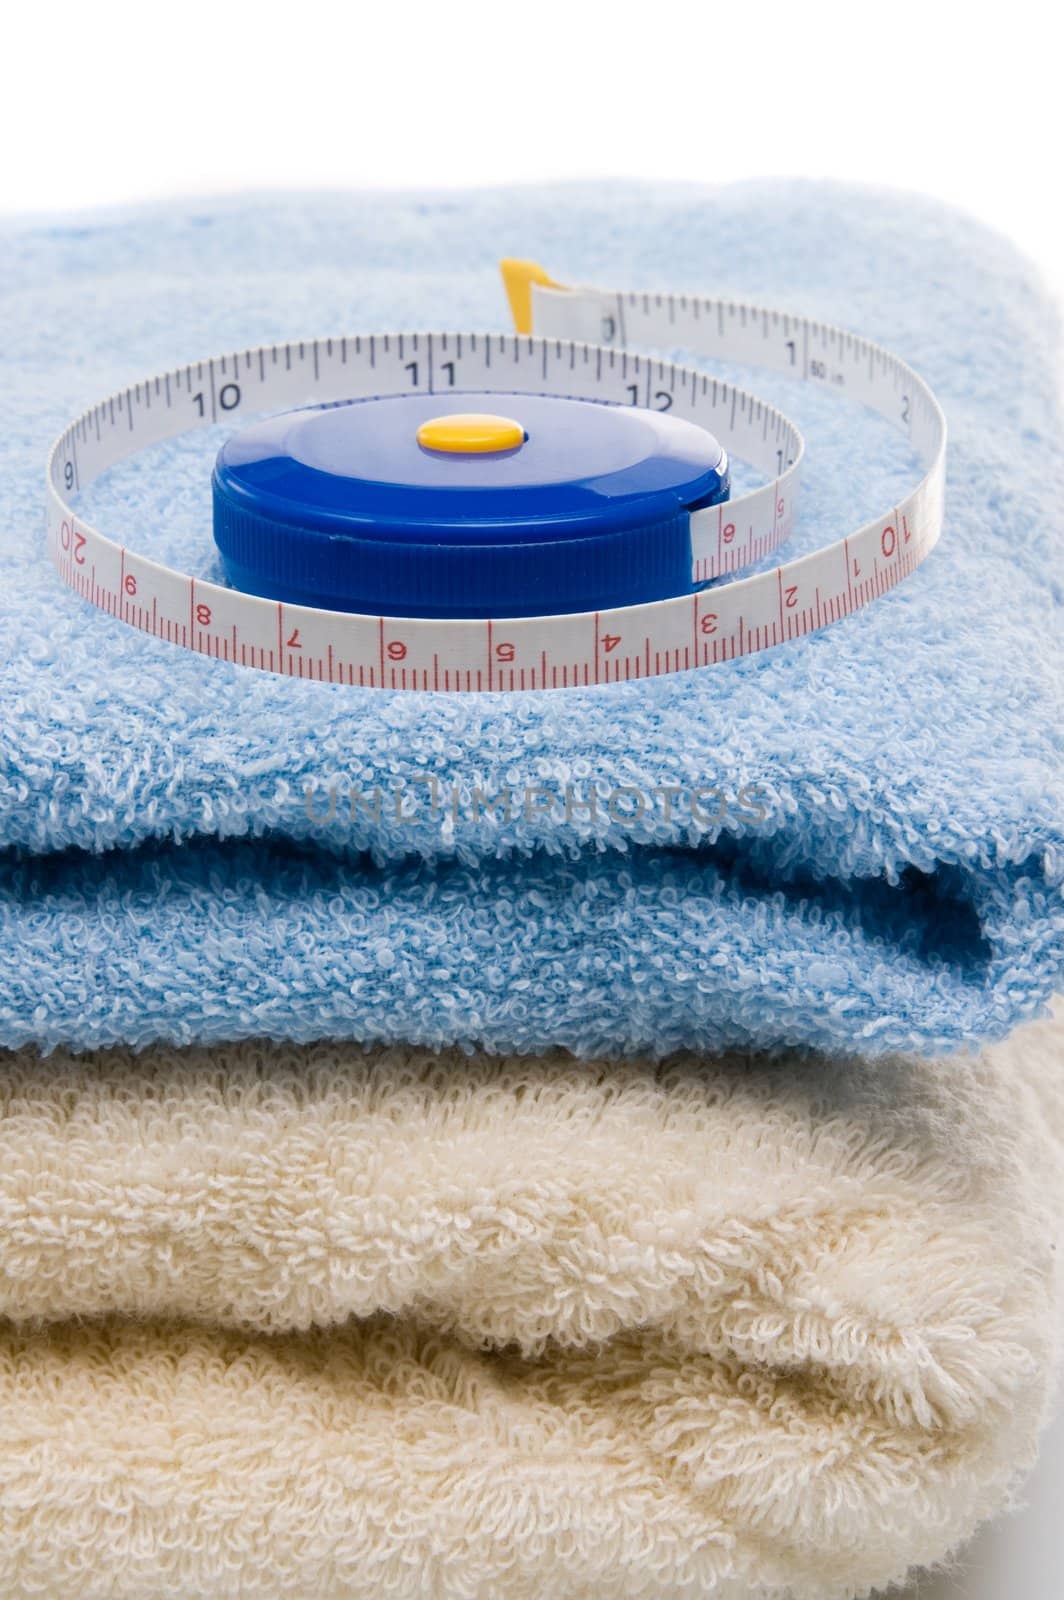 Pile of towels and tape measure, white background by Ravenestling